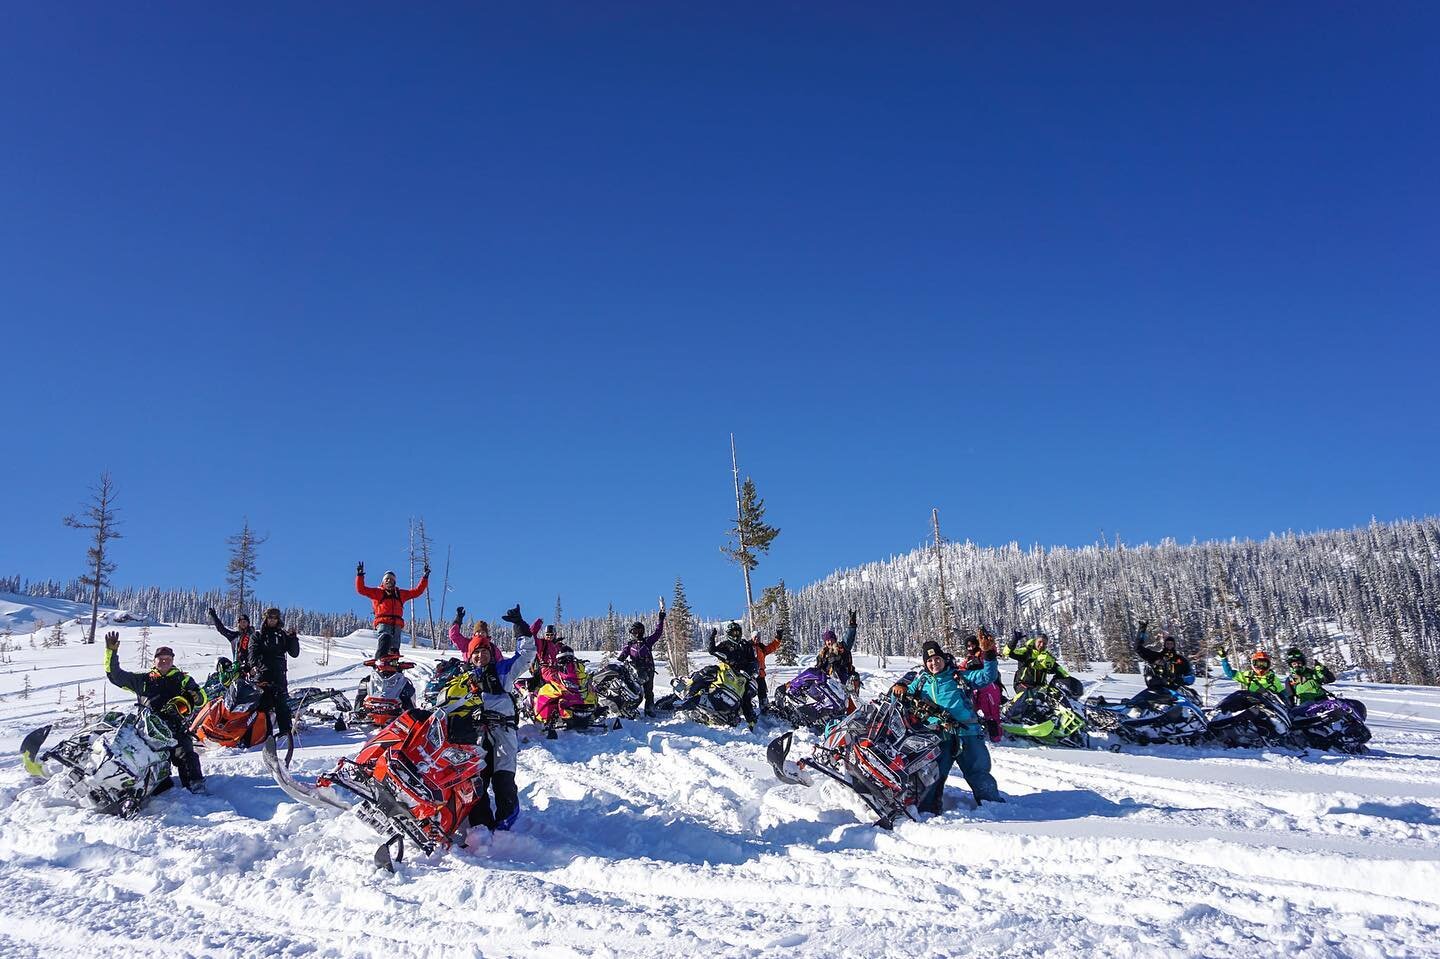 We couldn&rsquo;t be more stoked to welcome you back! 🤝 The border opened yesterday for fully vaccinated sledders from the south to begin safely and responsibly visiting Canada again. Looking forward to reuniting with great friends for amazing adven